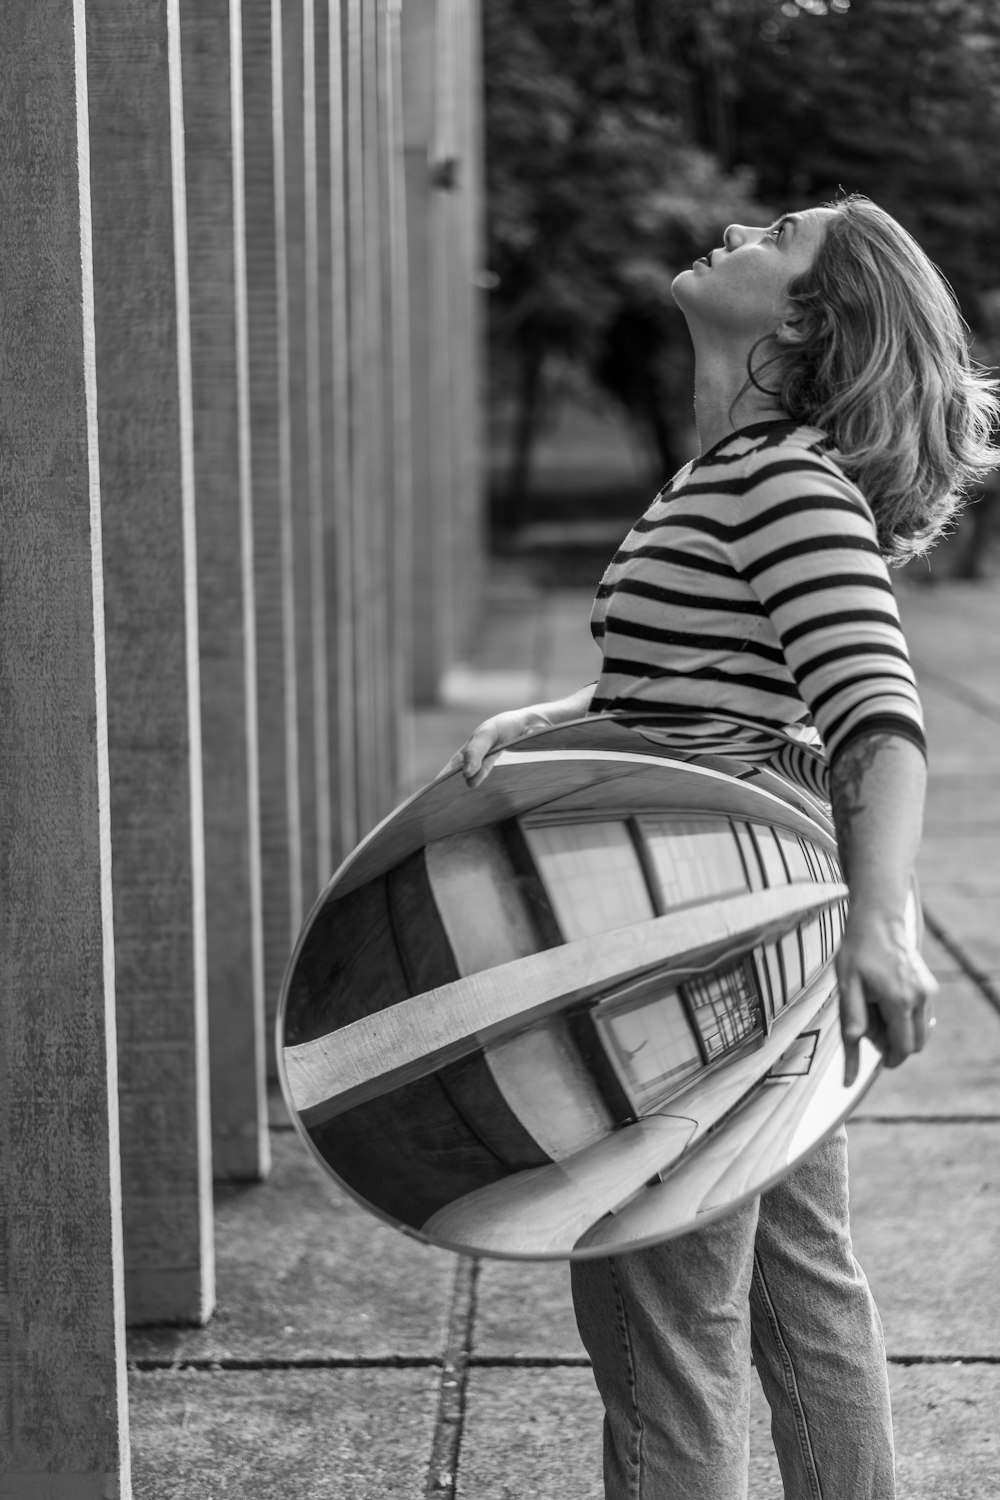 grayscale photo of woman in striped shirt and skirt